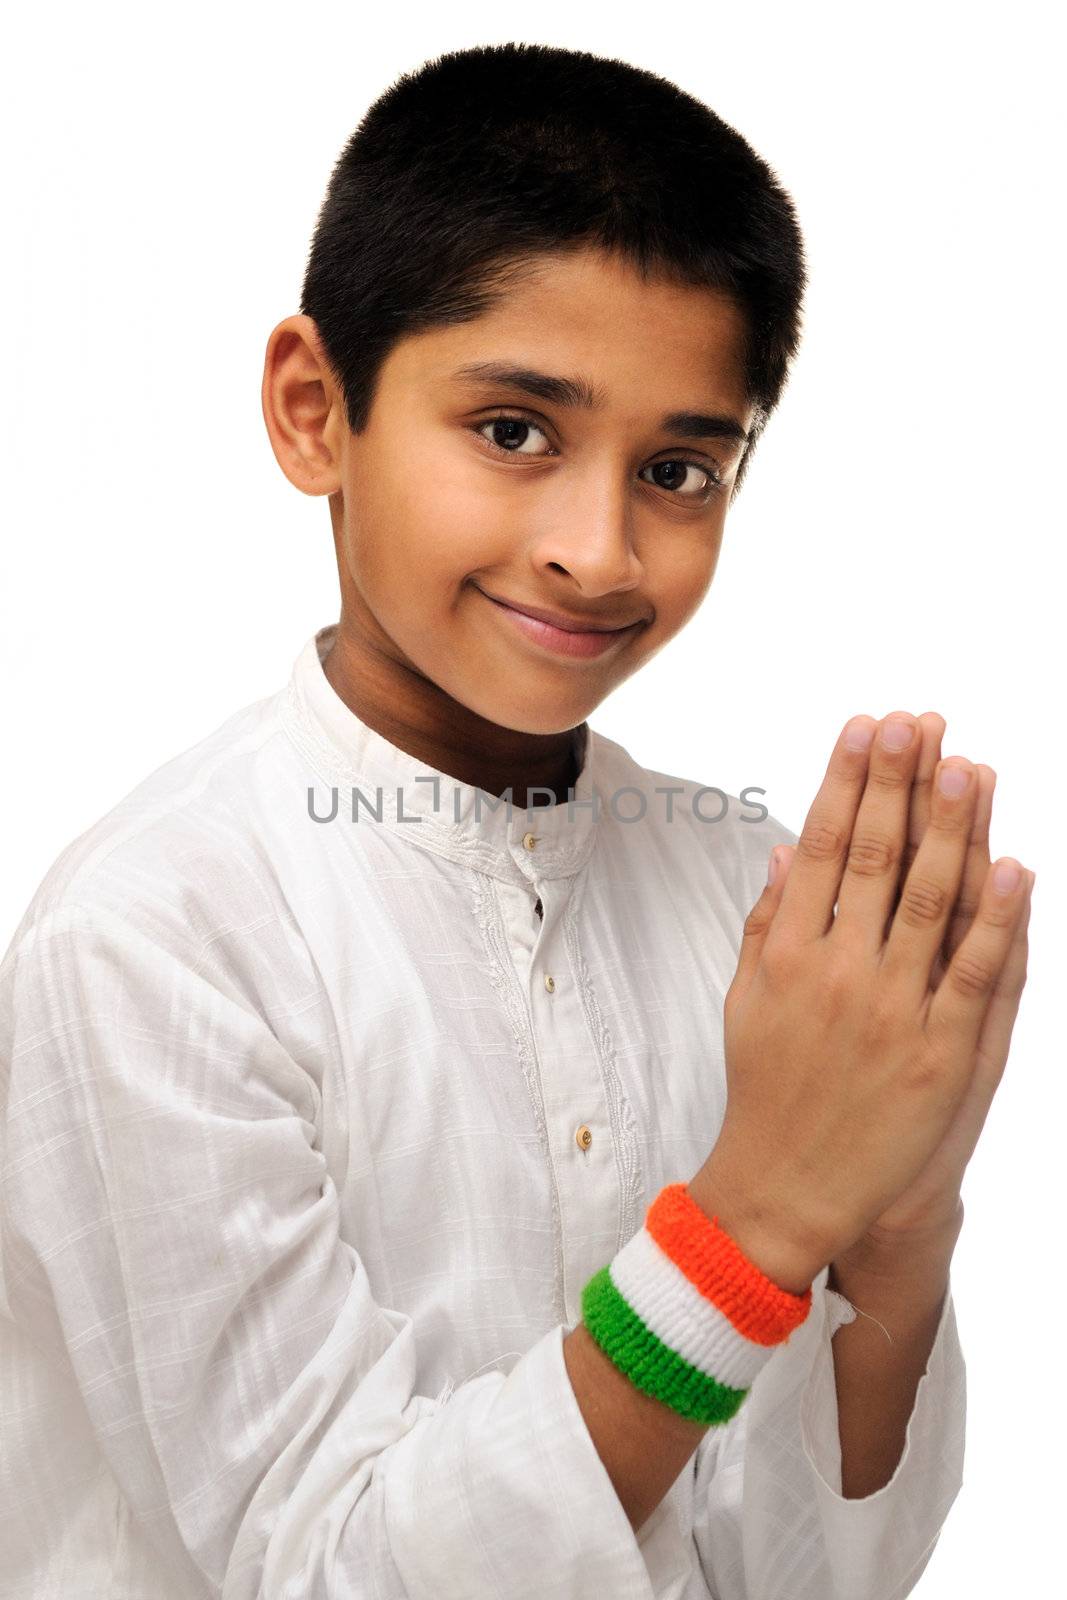 An handsome Indian kid showing his love for the country